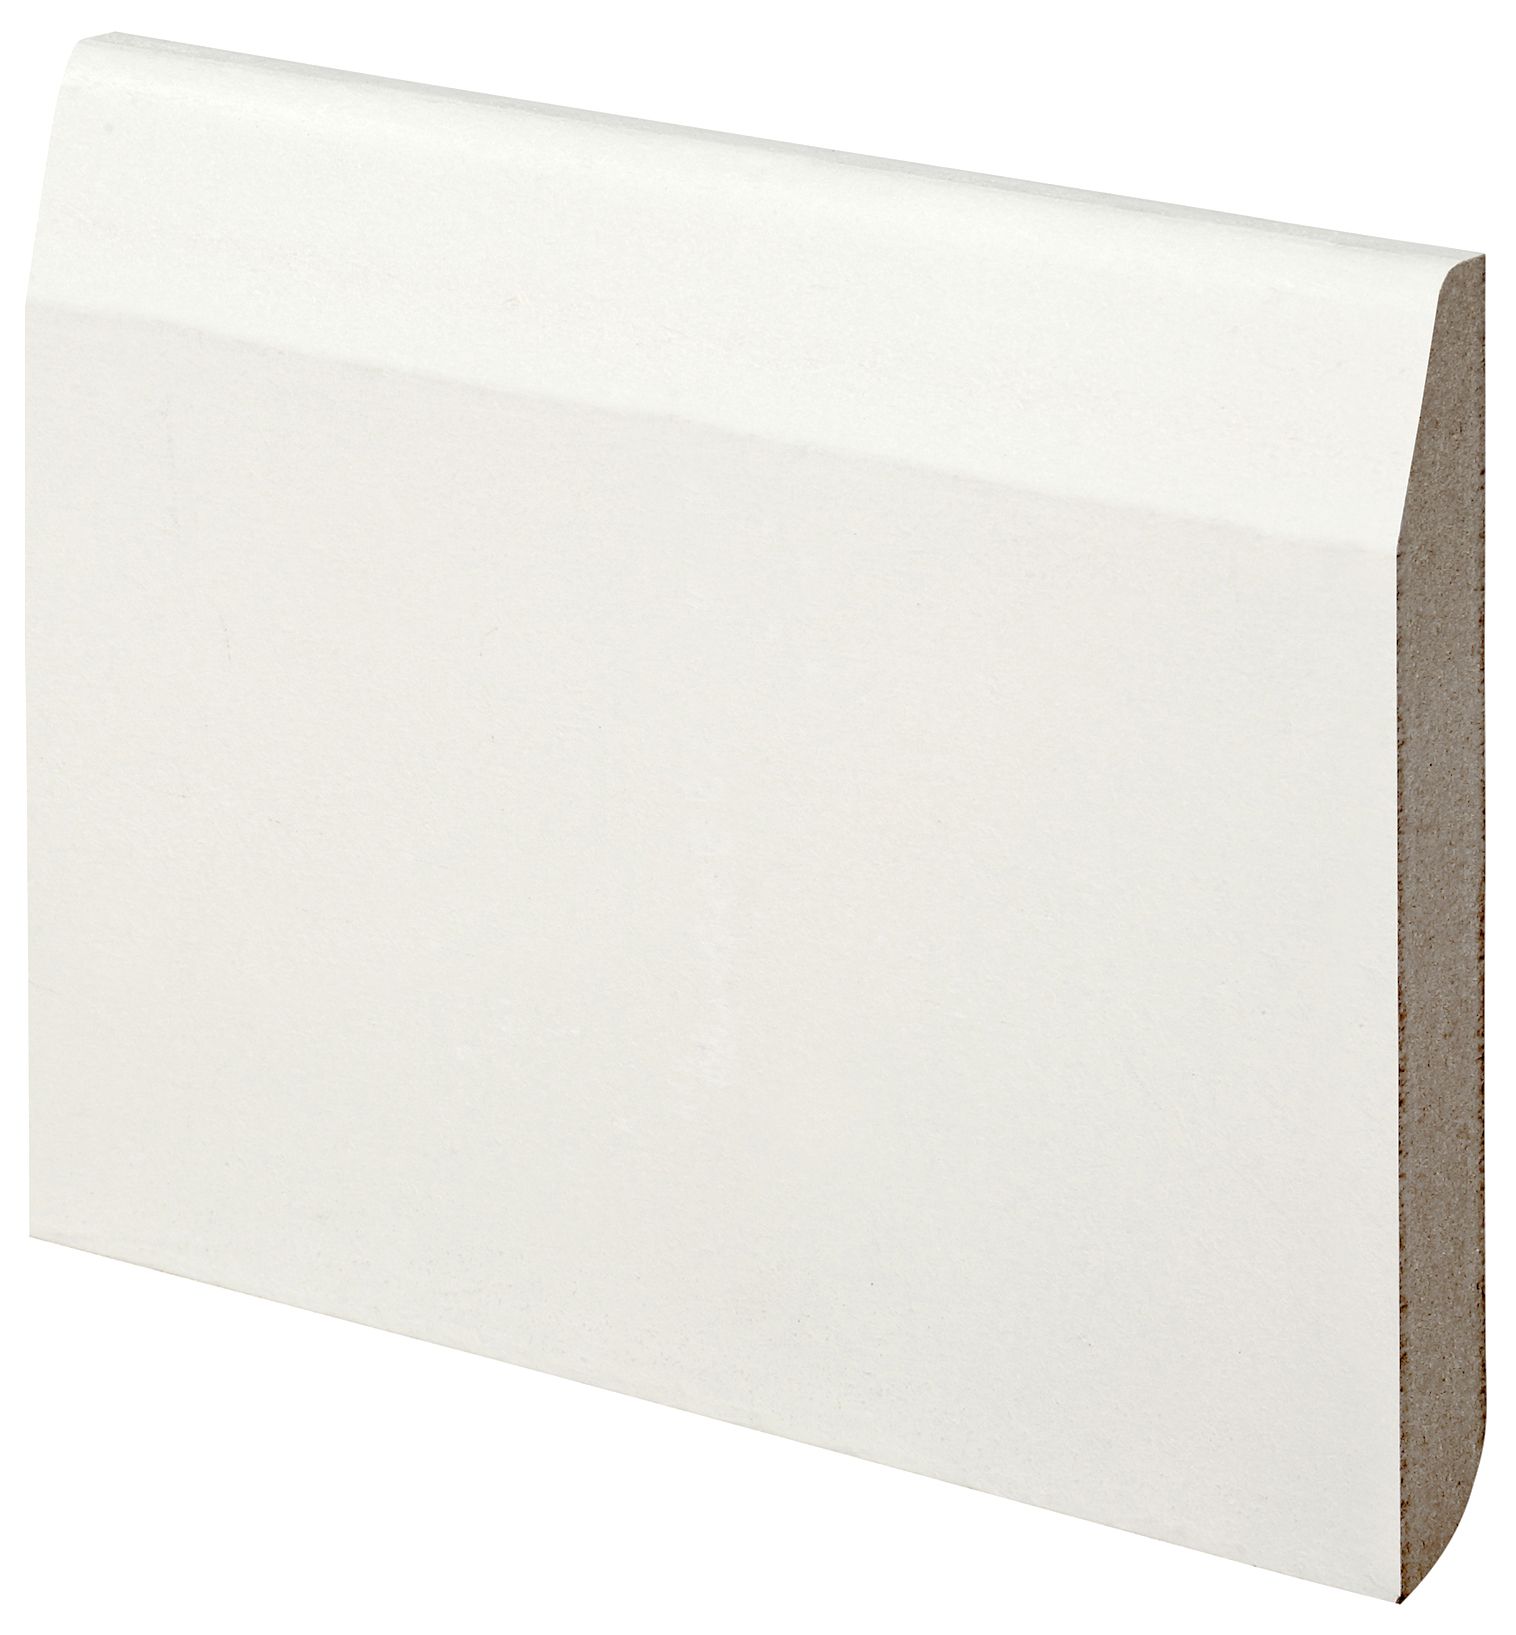 Image of Wickes Chamfered / Bullnose White MDF Skirting - 18 x 119 x 4200mm